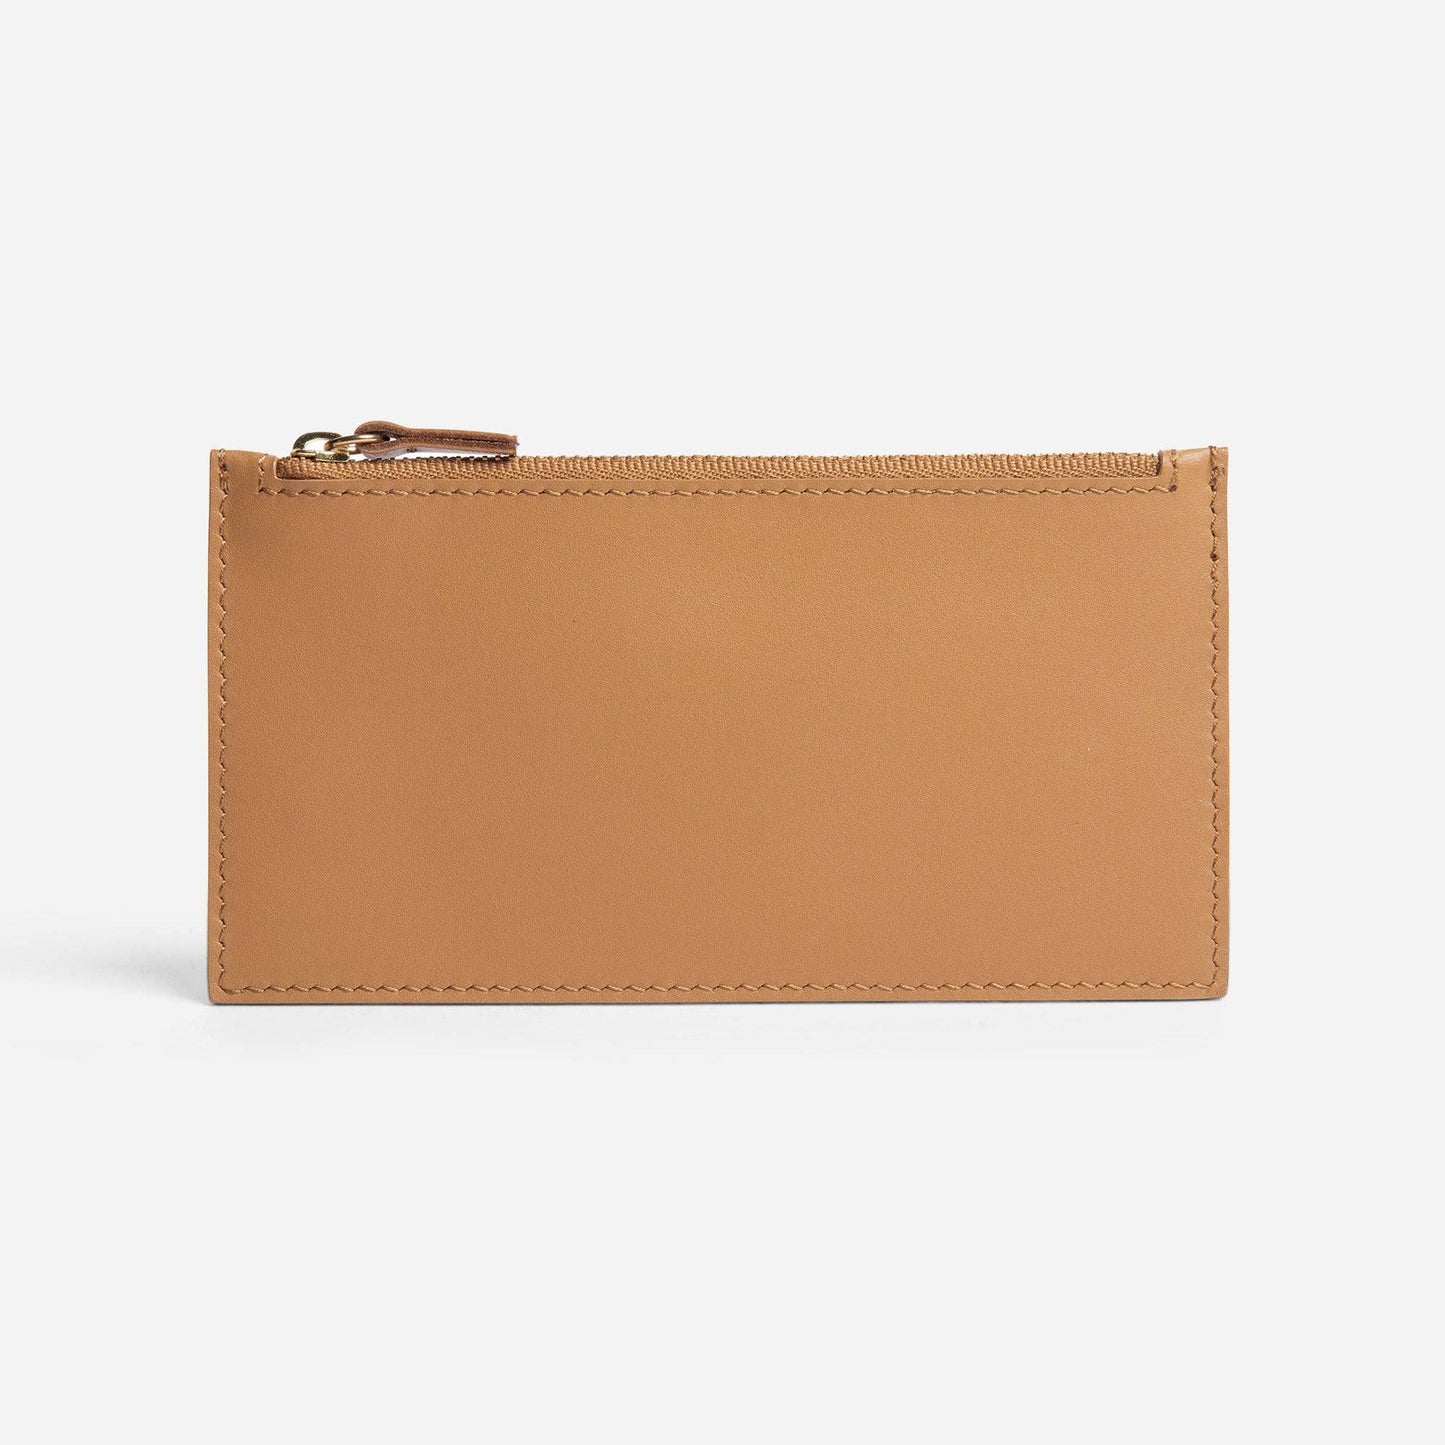 The Backstage Zipper Pouch - Saddle